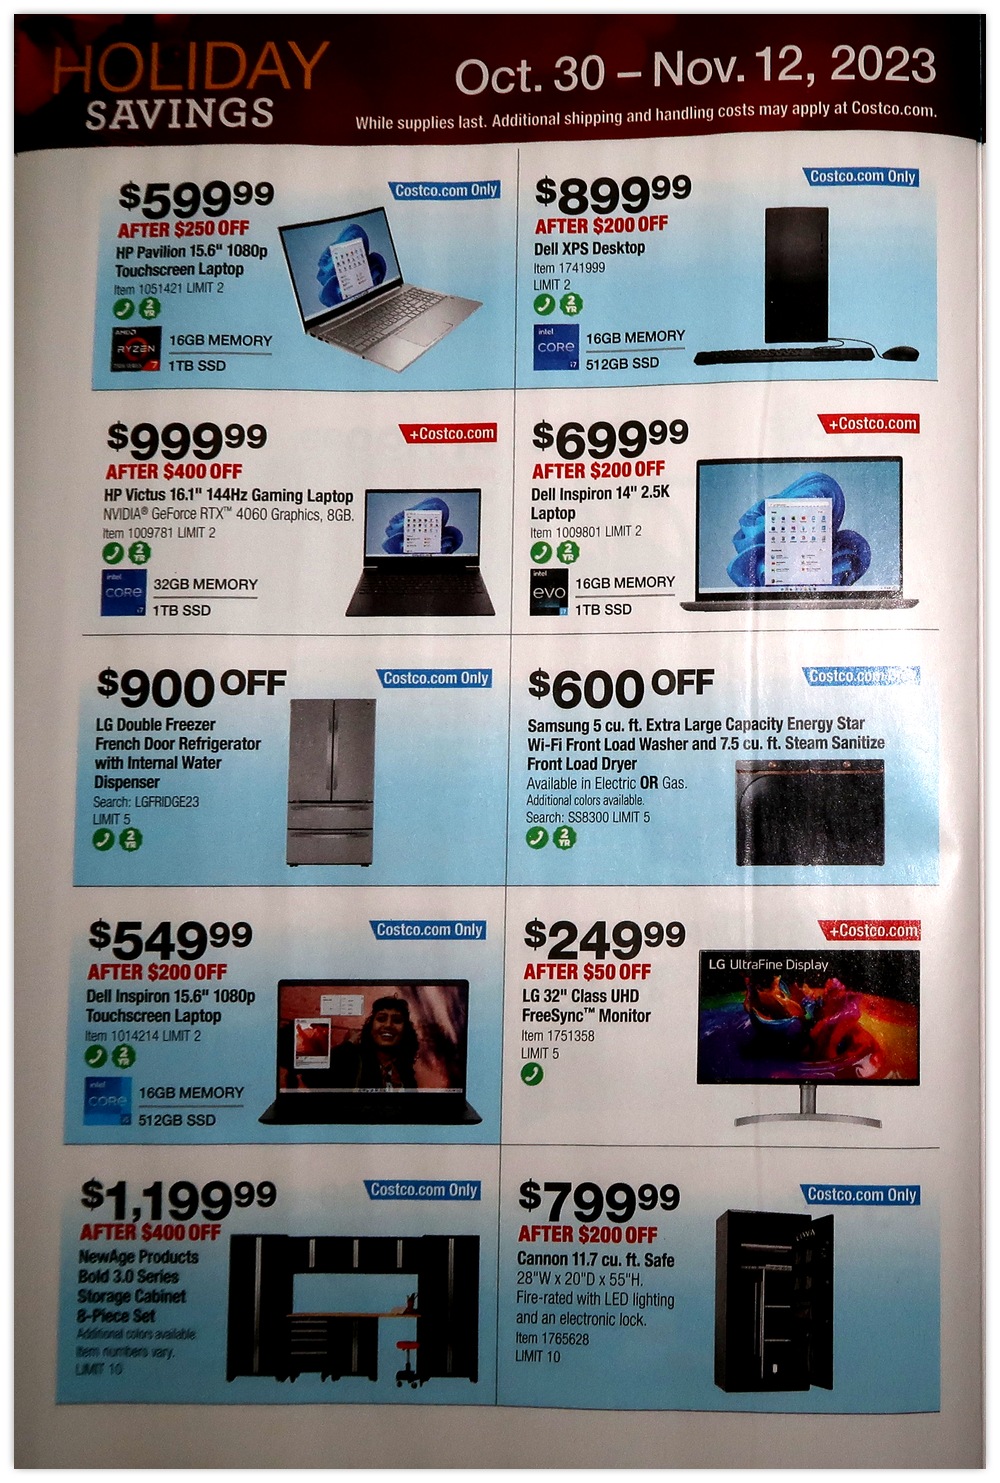 P6: New Ad Scan 6